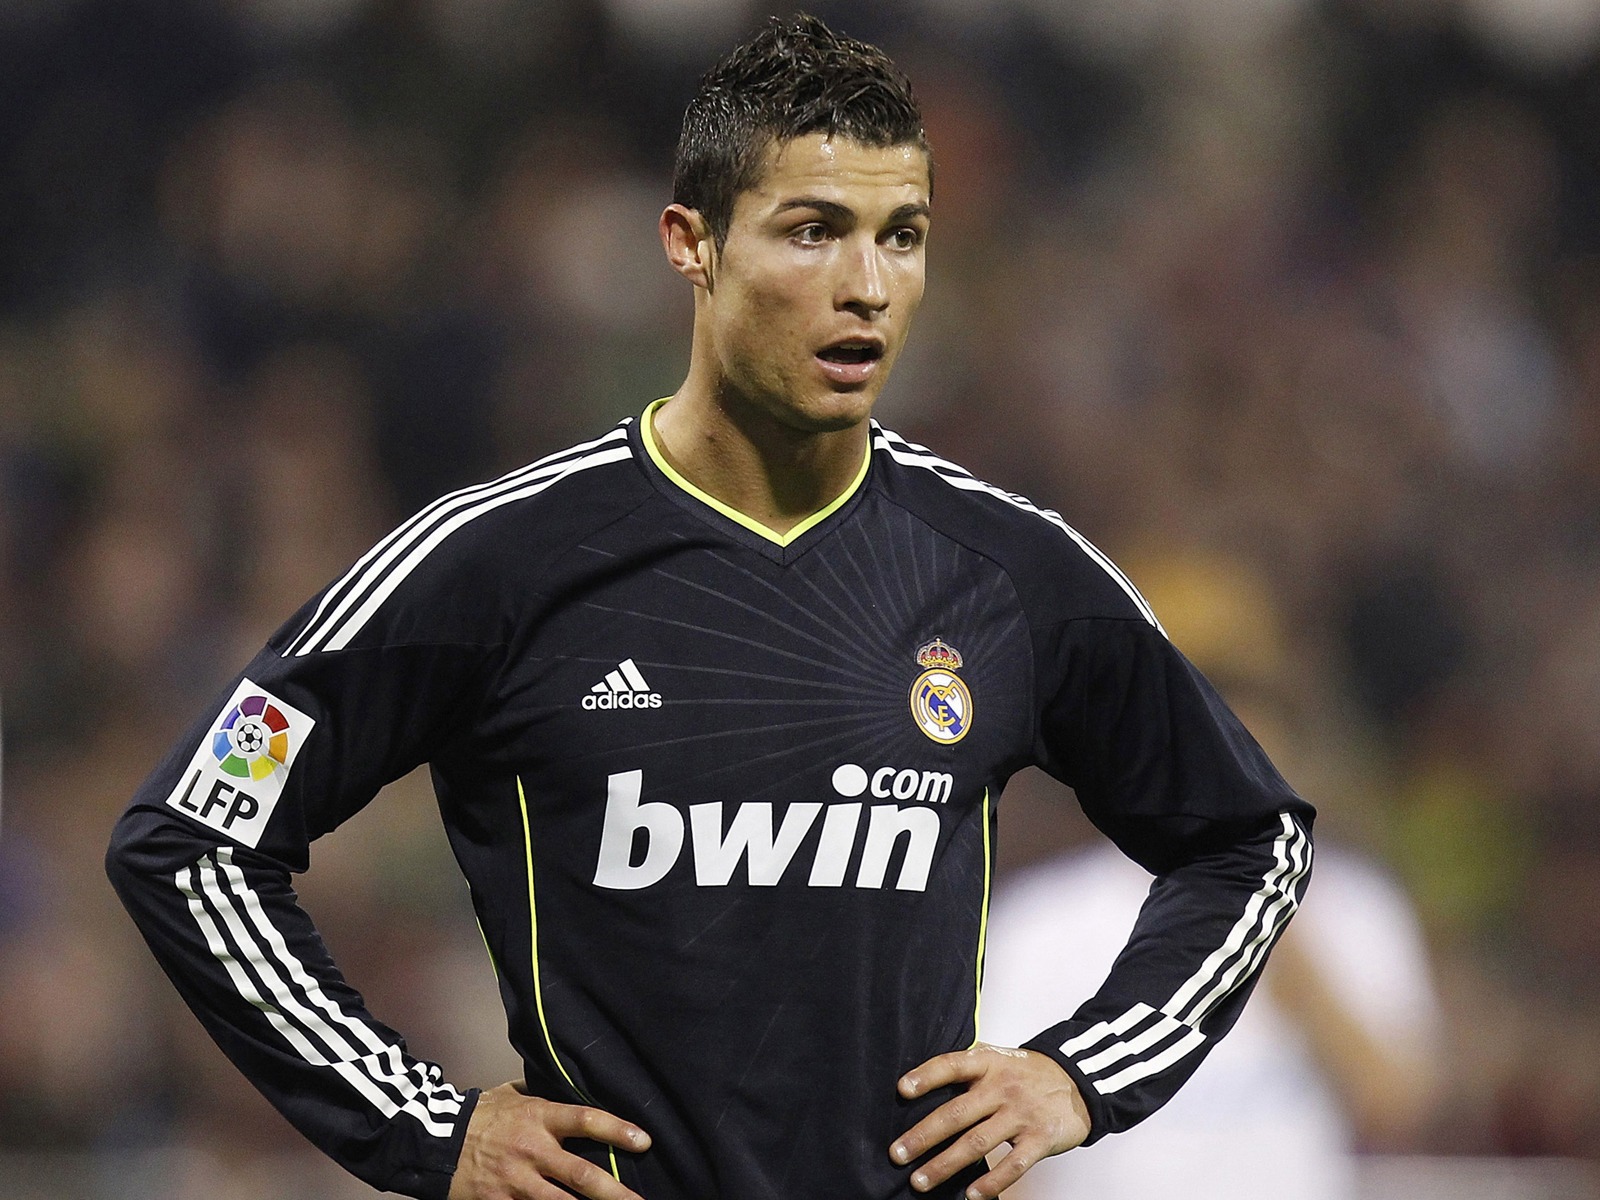 Christiano Ronaldo Image Cr7 HD Wallpaper And Background Photos